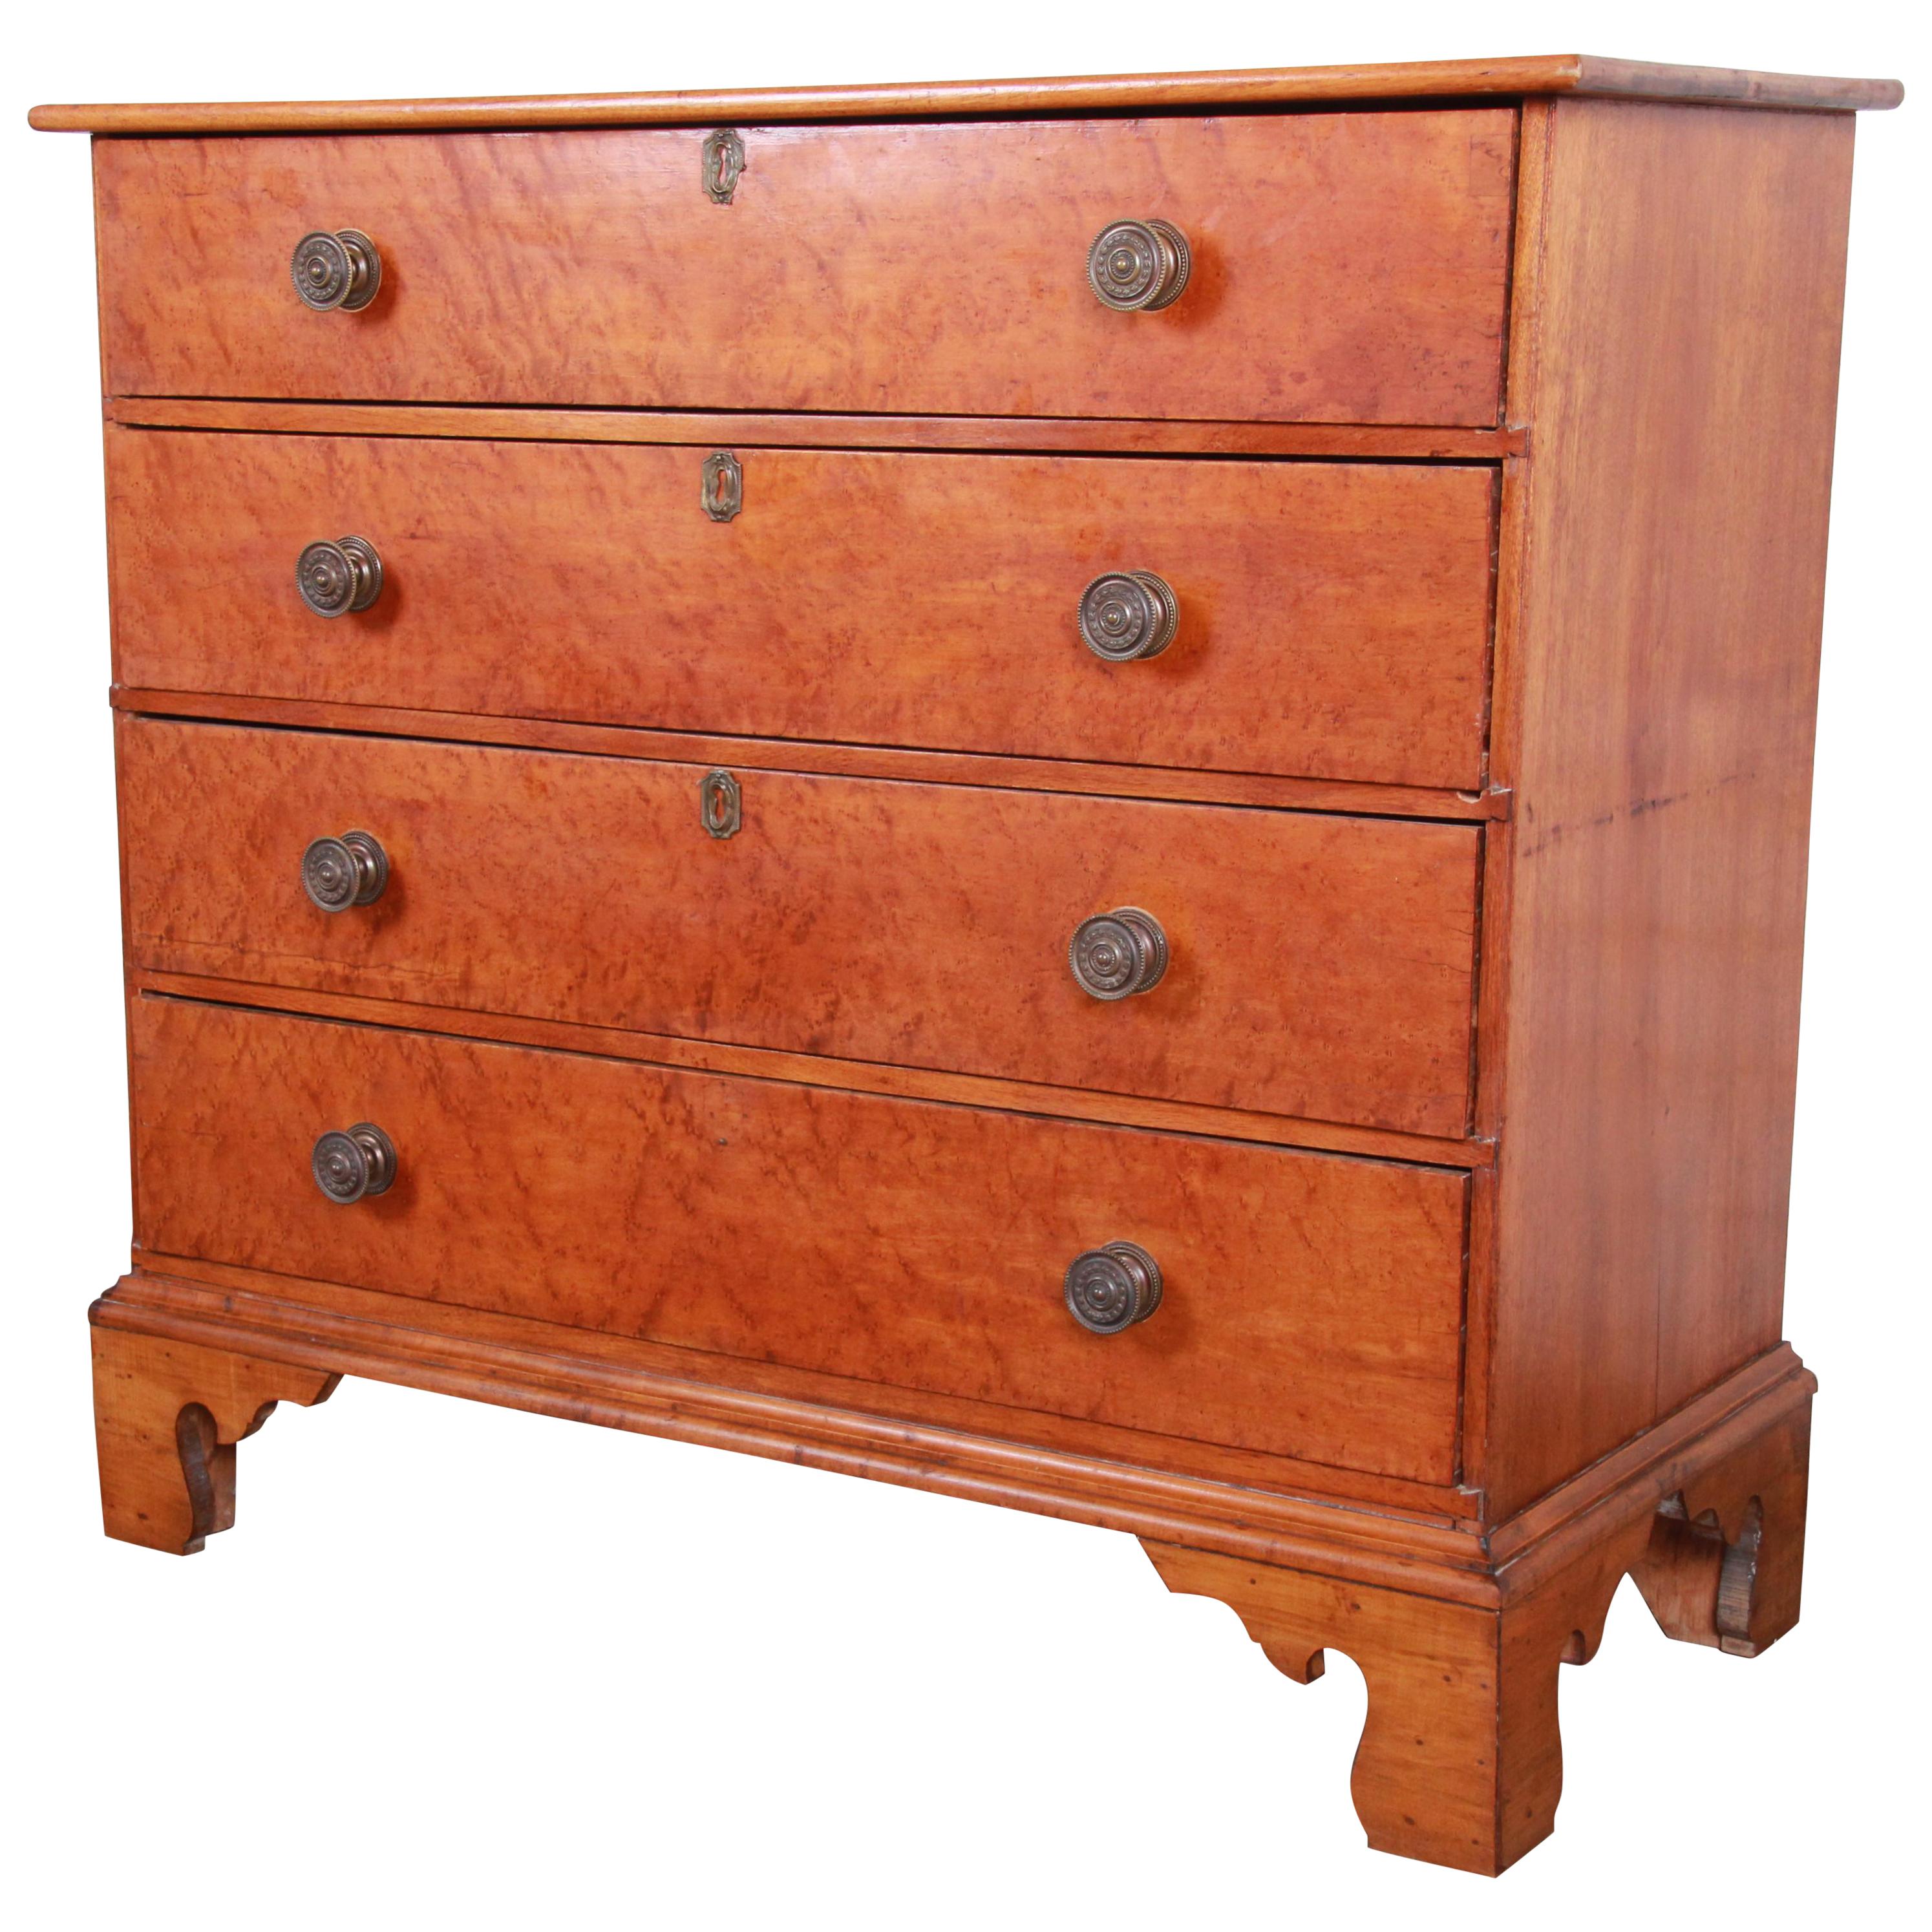 18th Century Early American Bird's-Eye Maple Chippendale Chest of Drawers